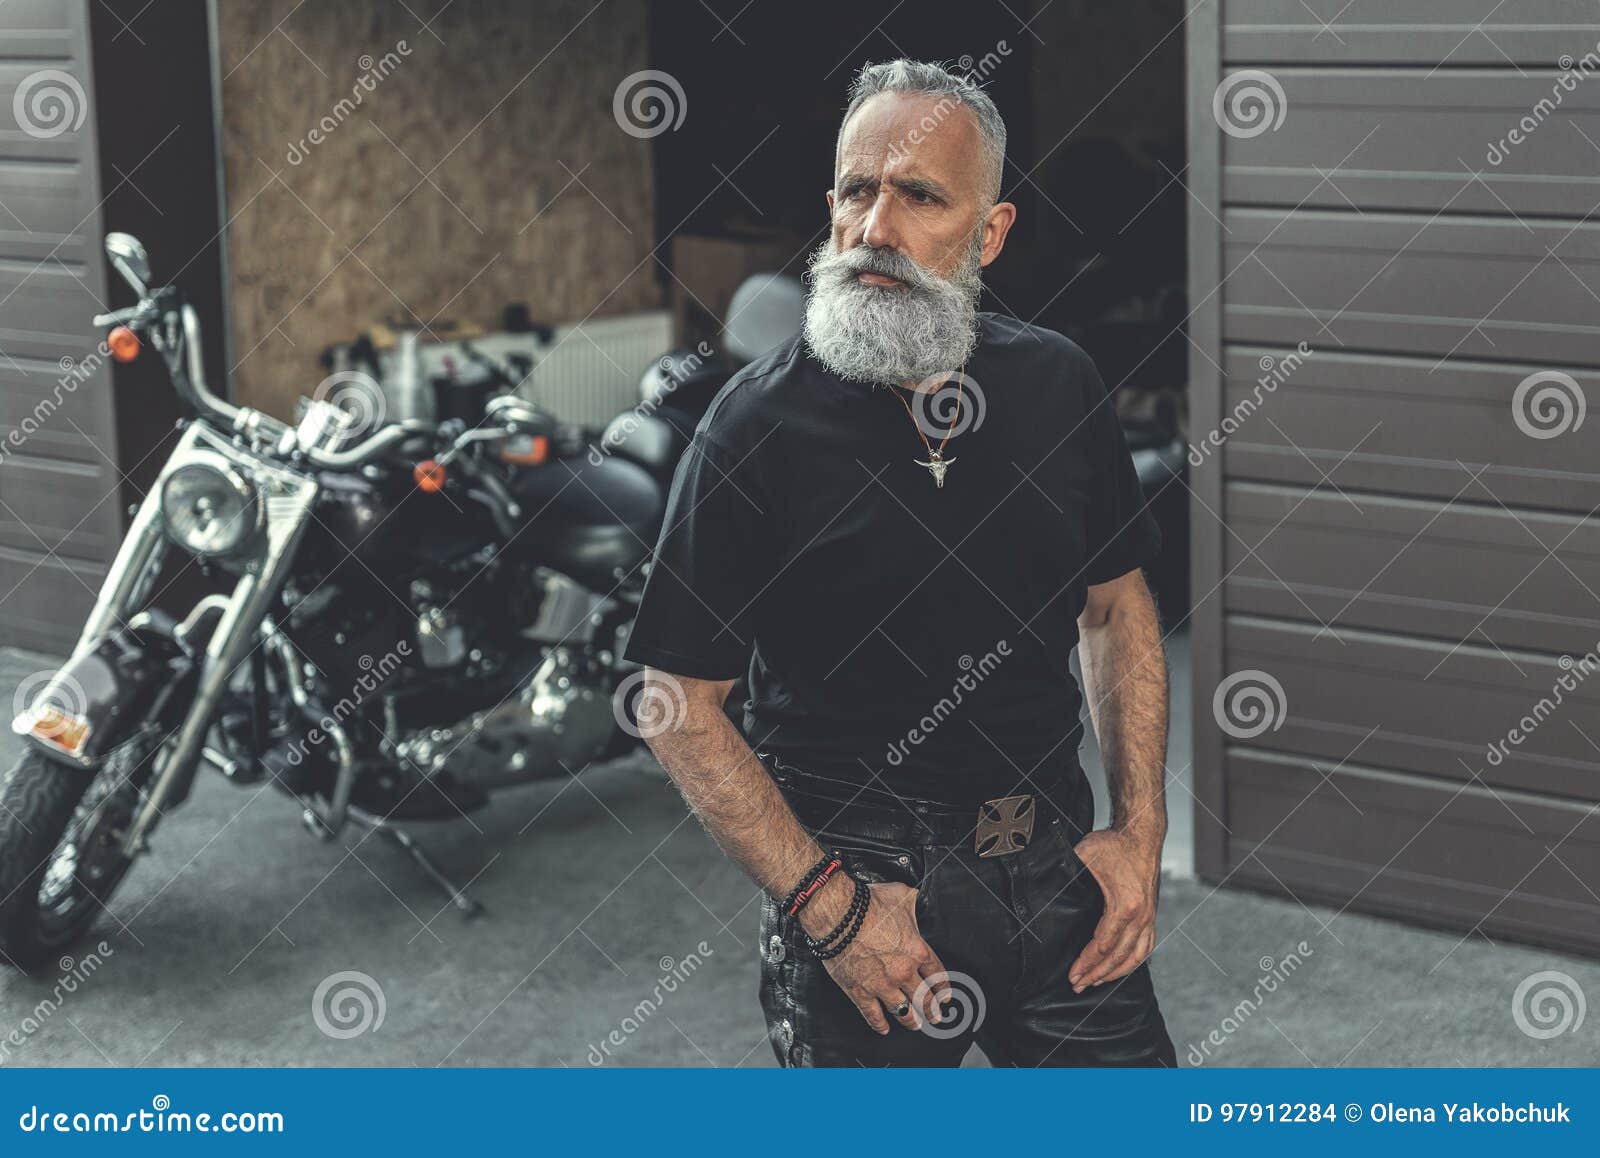 Serious Old Man Waiting for Someone Stock Photo - Image of proud ...